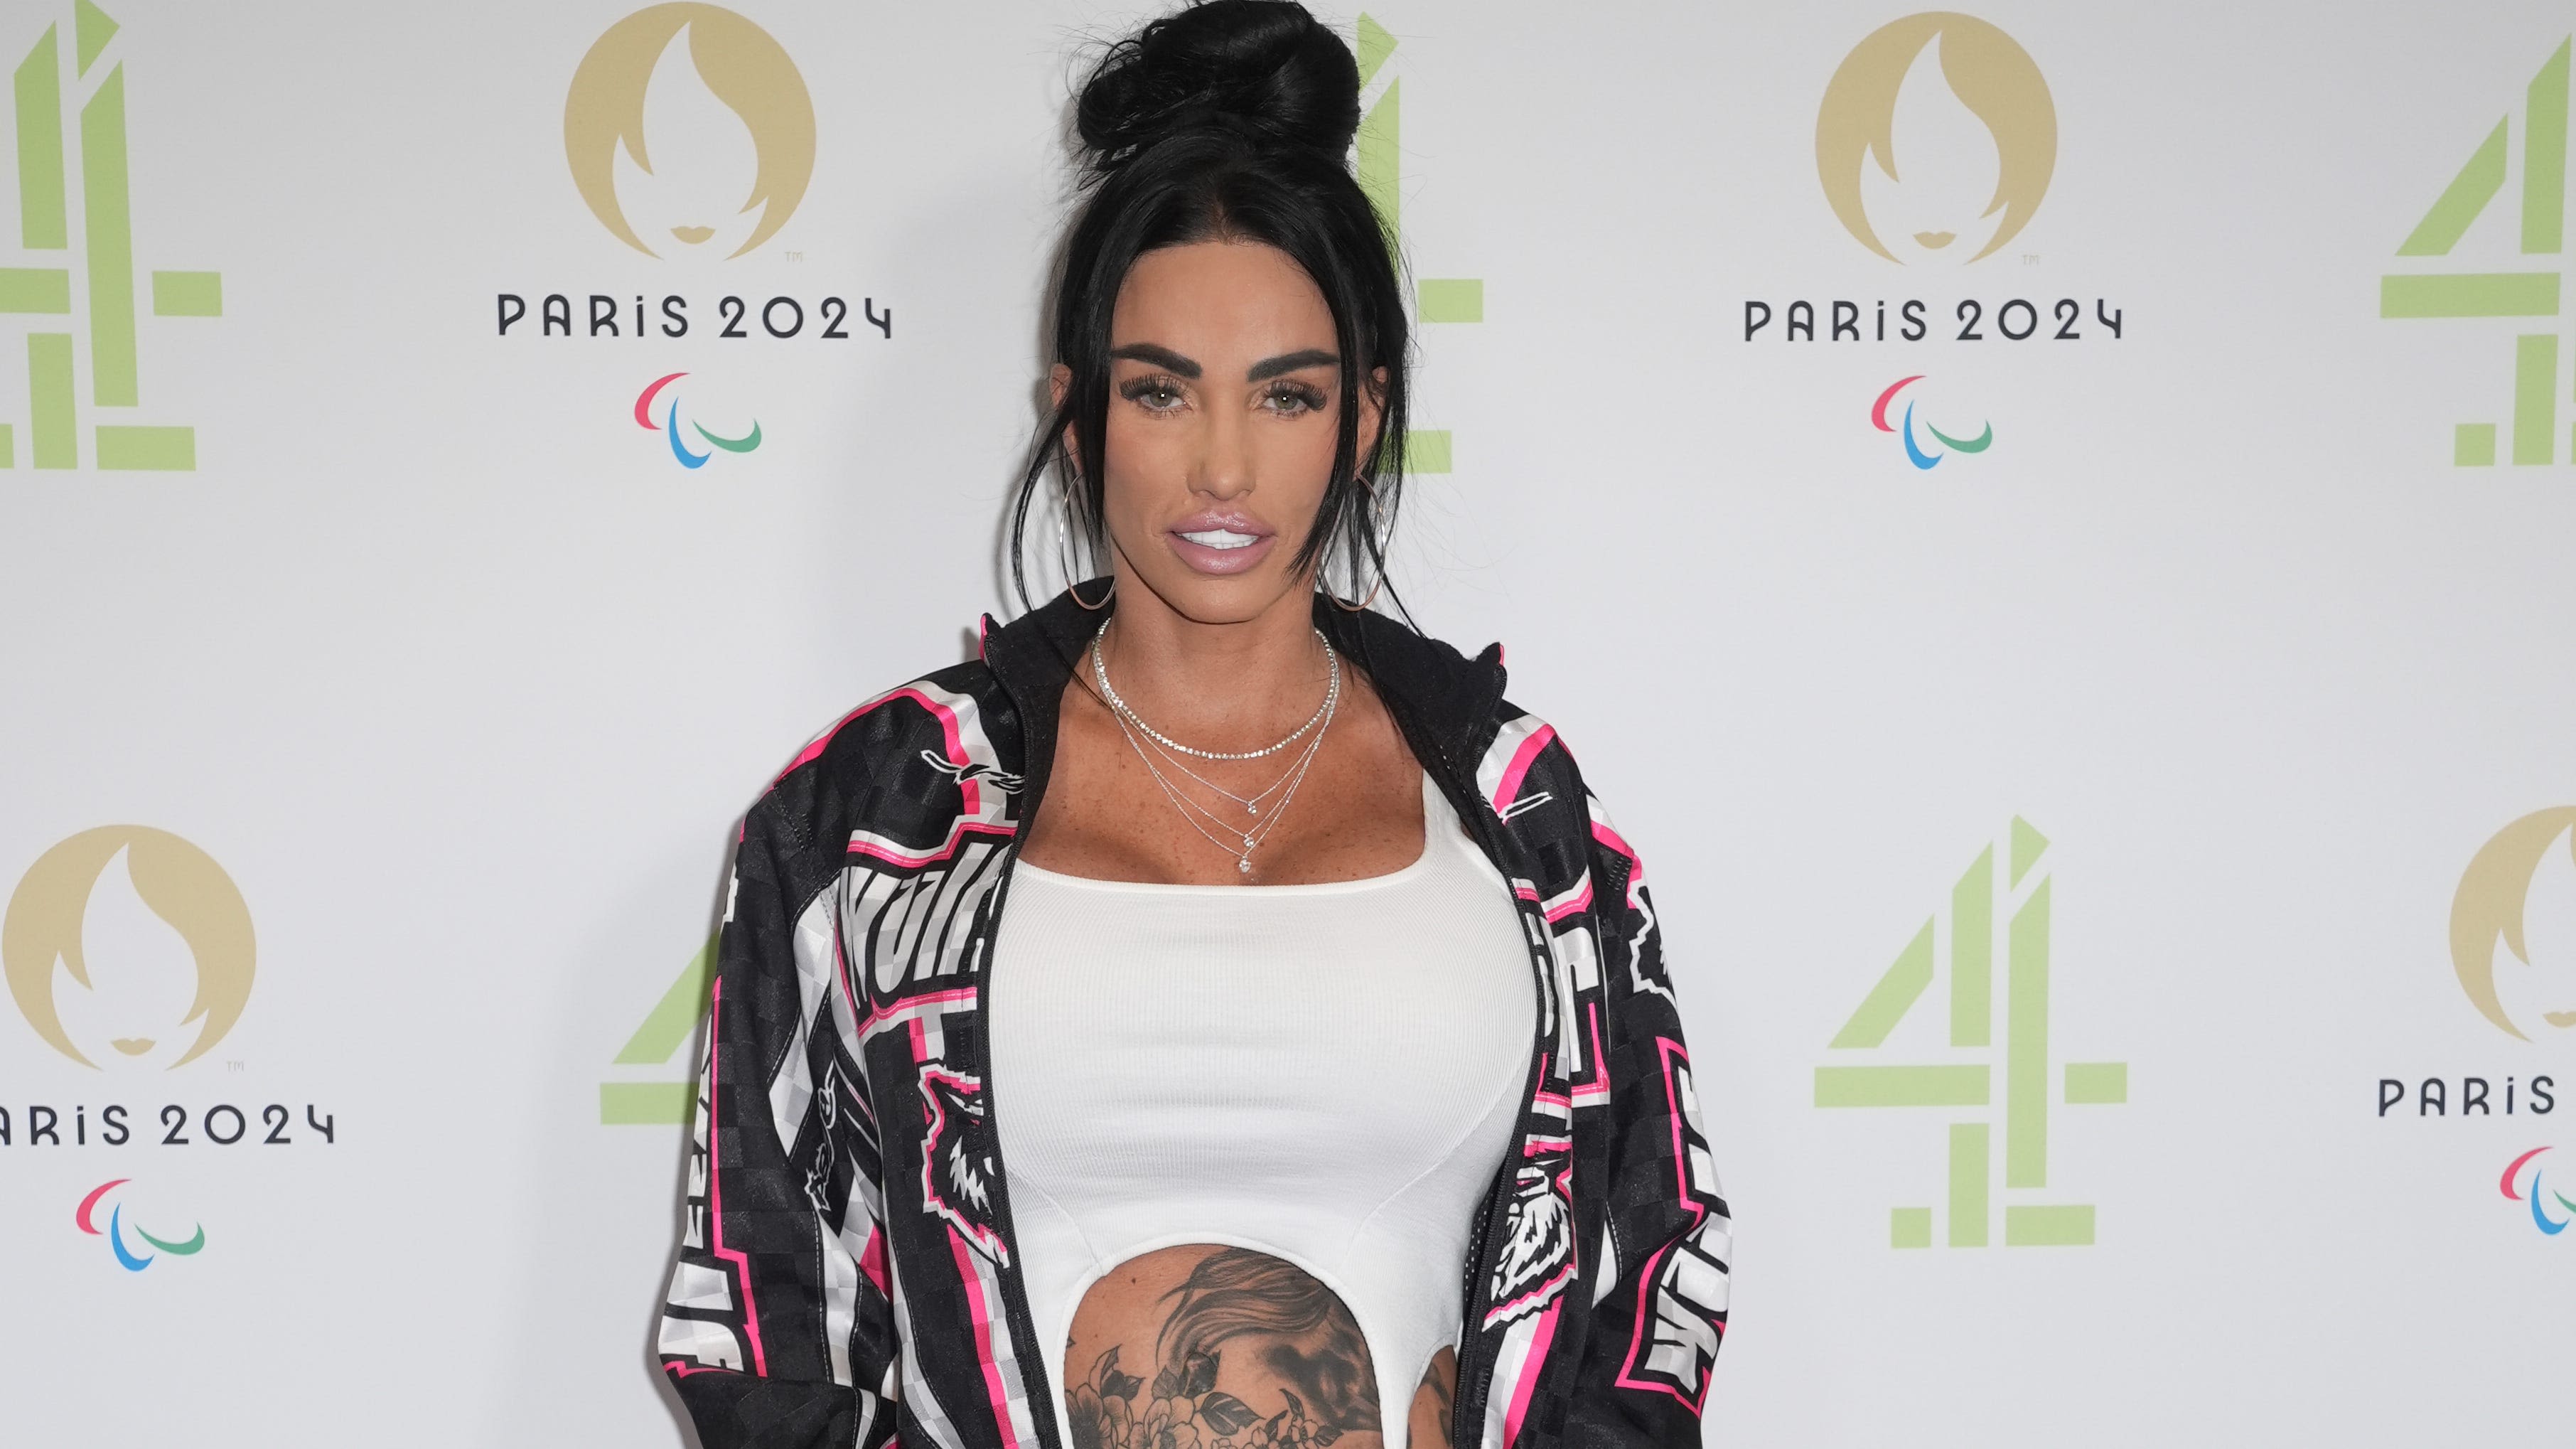 Katie Price says she is ‘not running from matters’ after arrest warrant issued